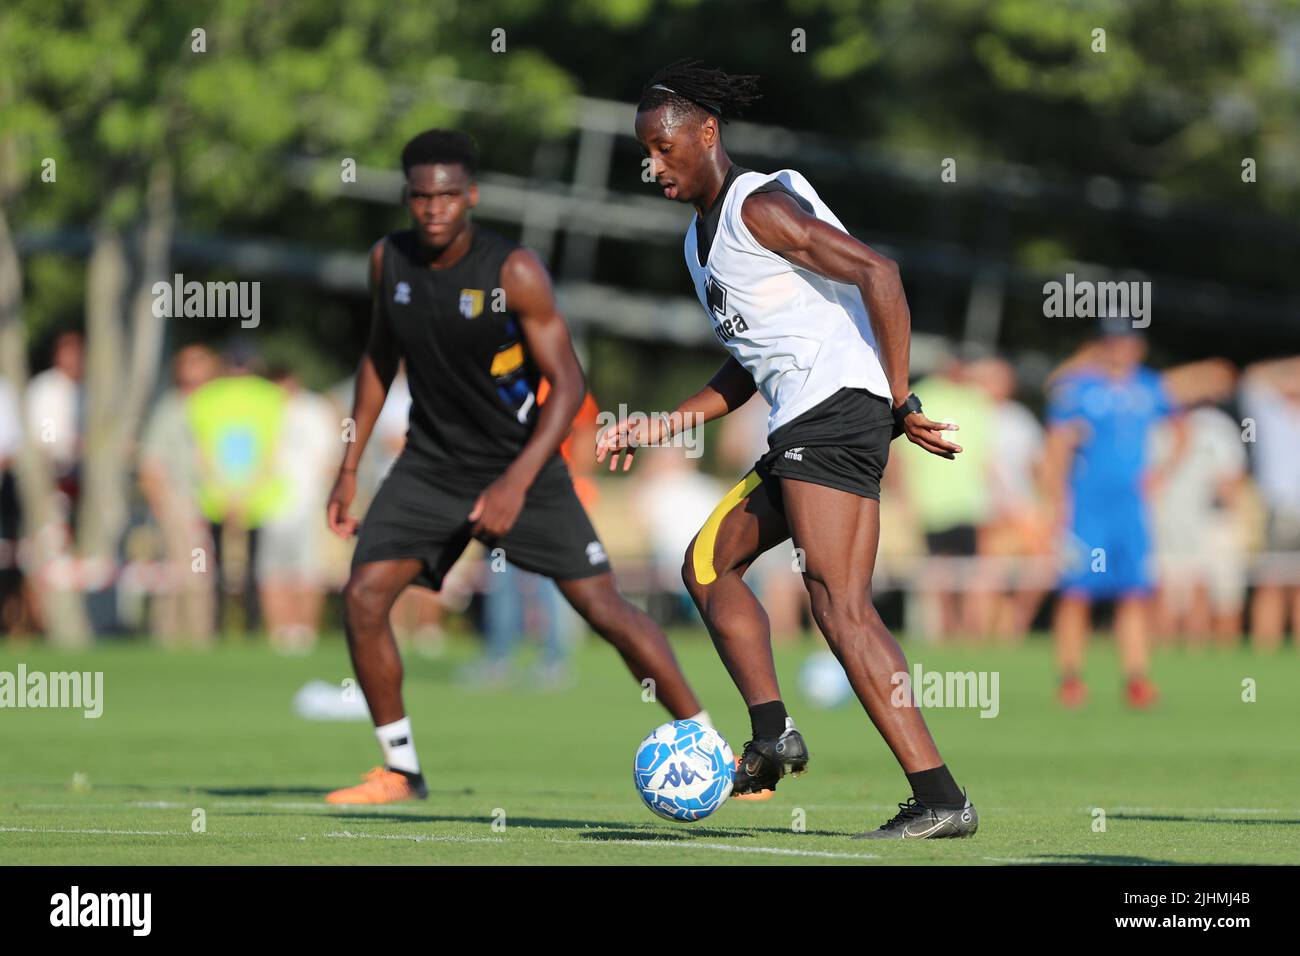 Collecchio, Italy: July 19, 2022, Woyo Coulibaly of Parma Calcio in action  during the training session